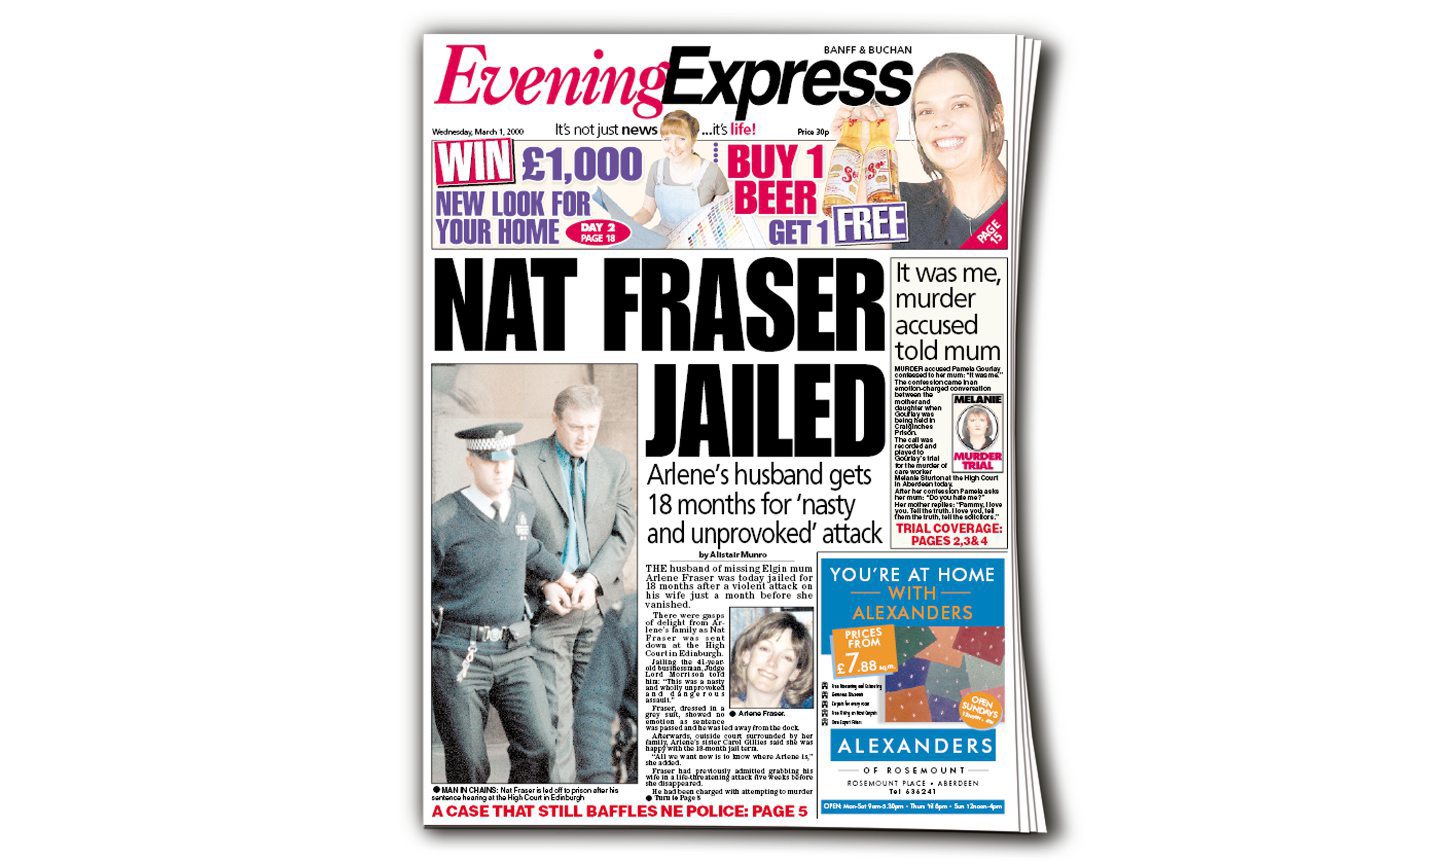 Coverage of Nat Fraser's conviction from the Evening Express in March 2000. 